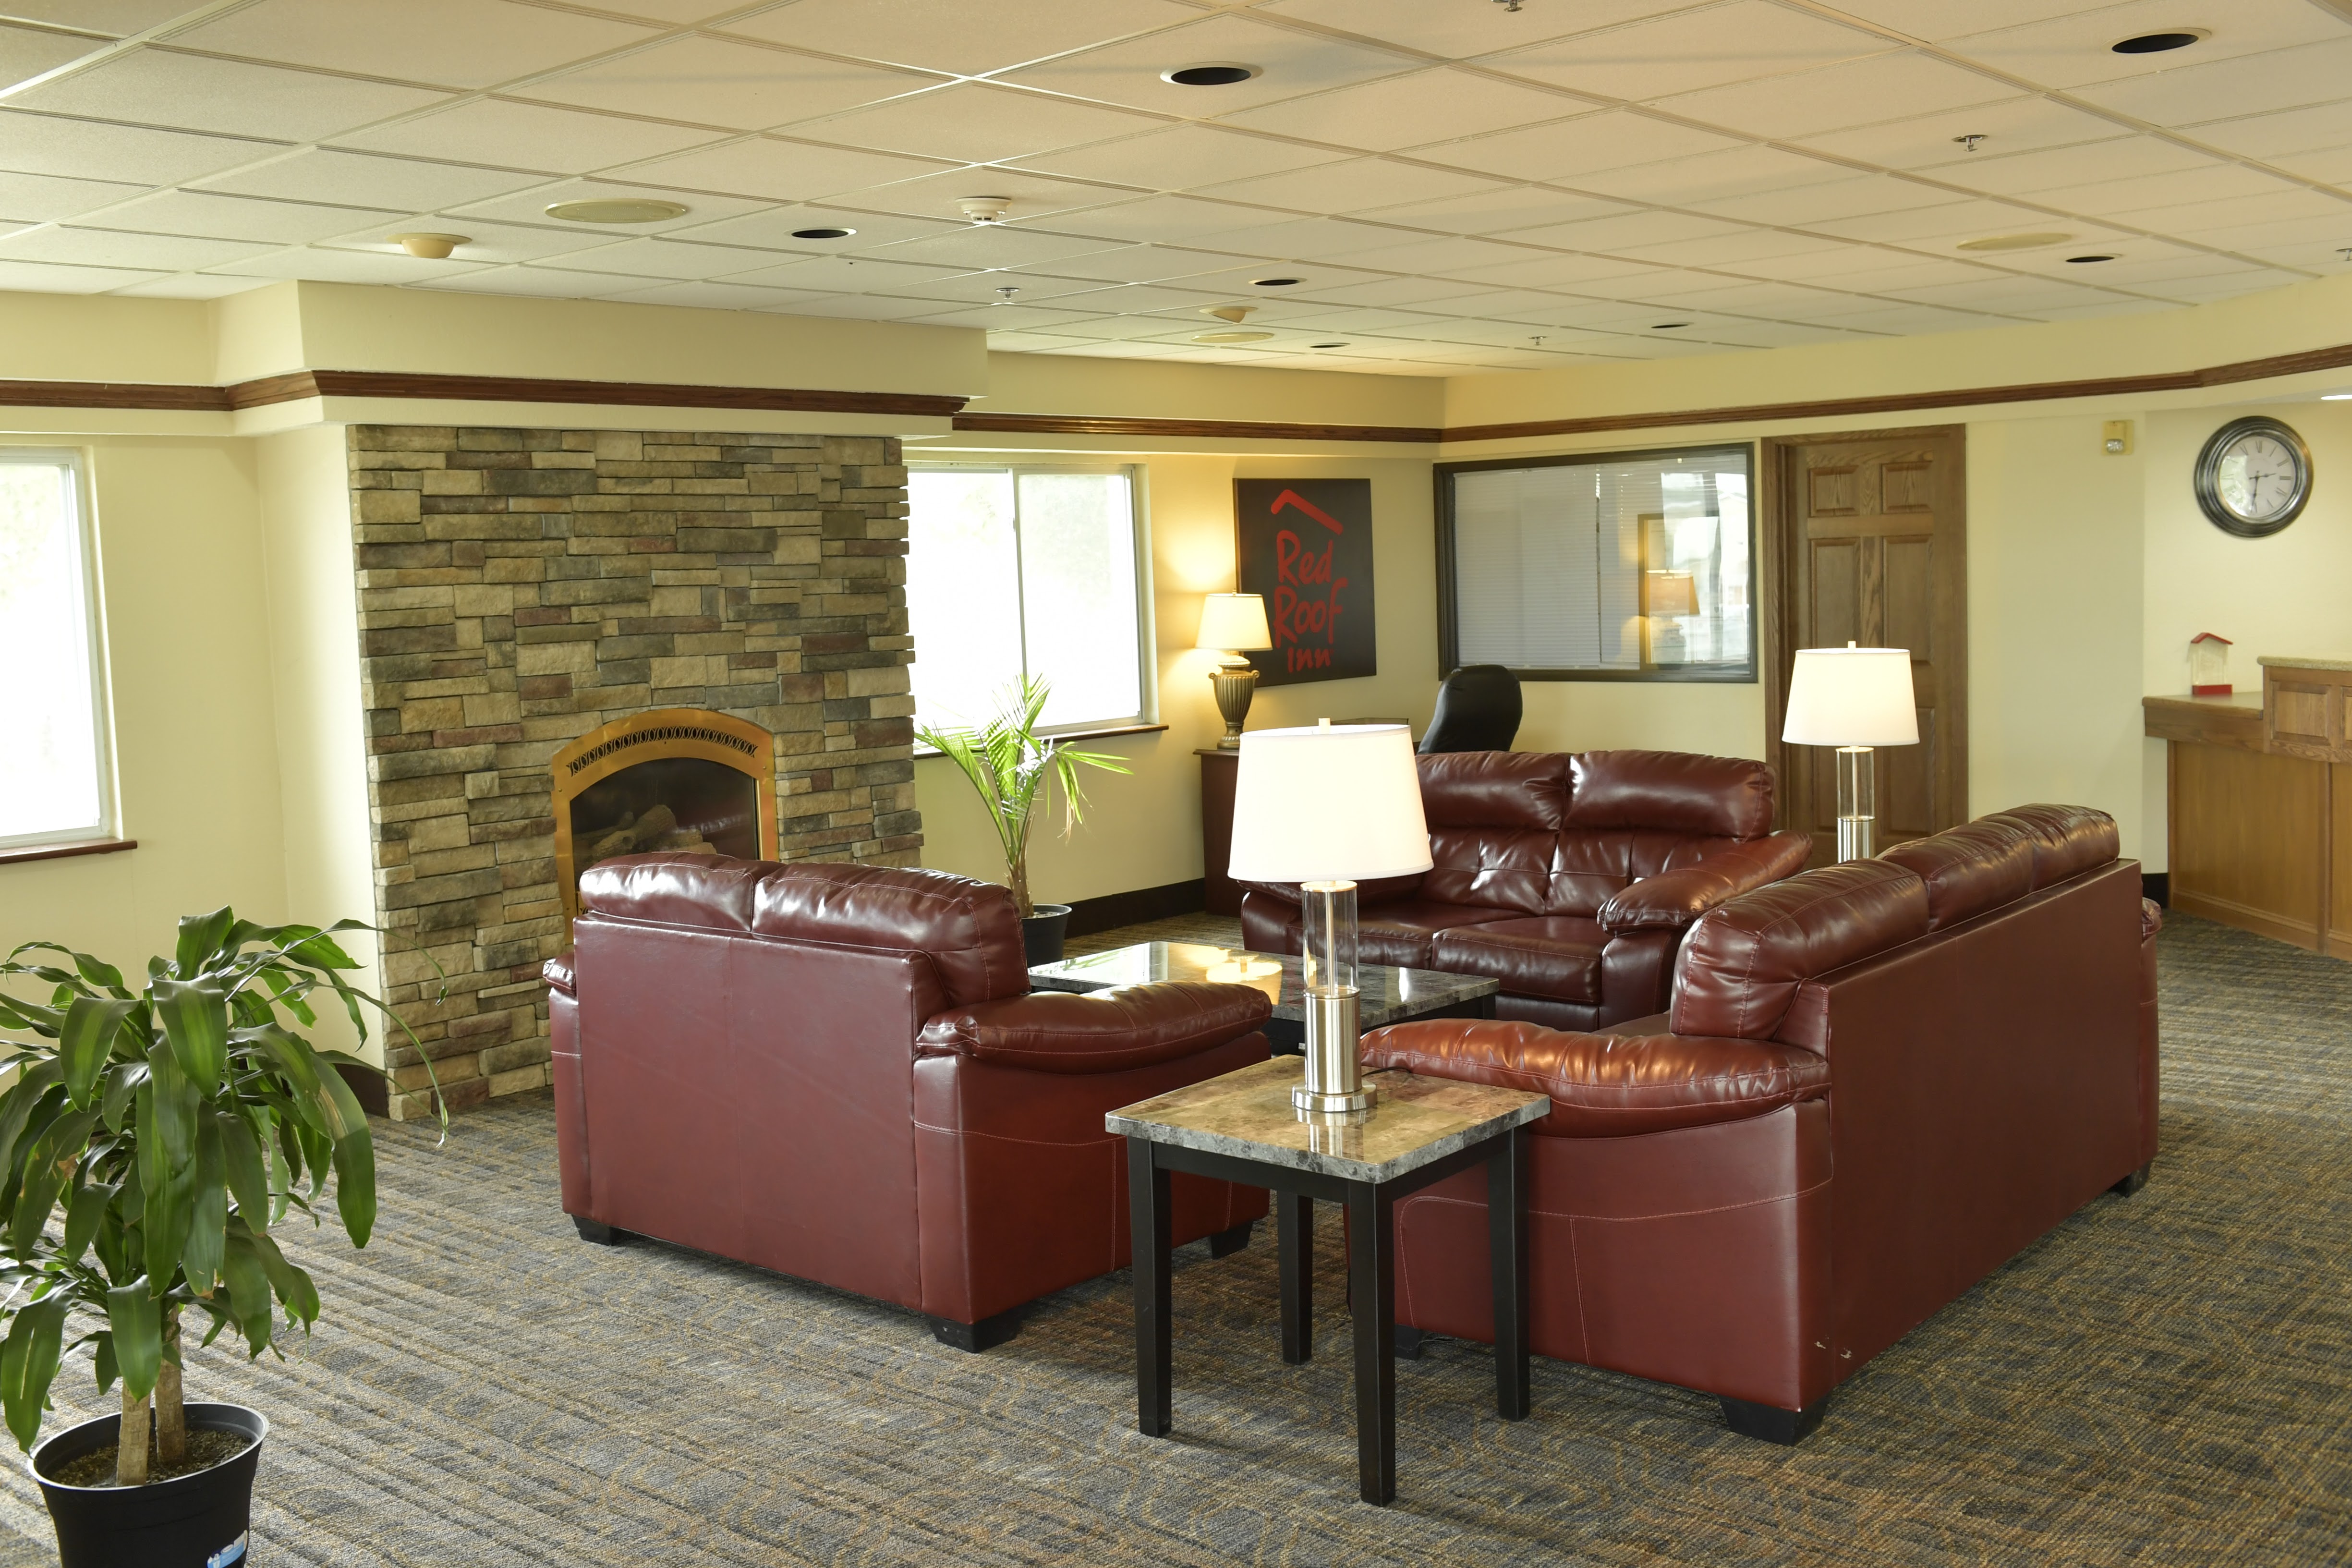 Red Roof Inn & Suites Lincoln Lincoln (402)477-1100